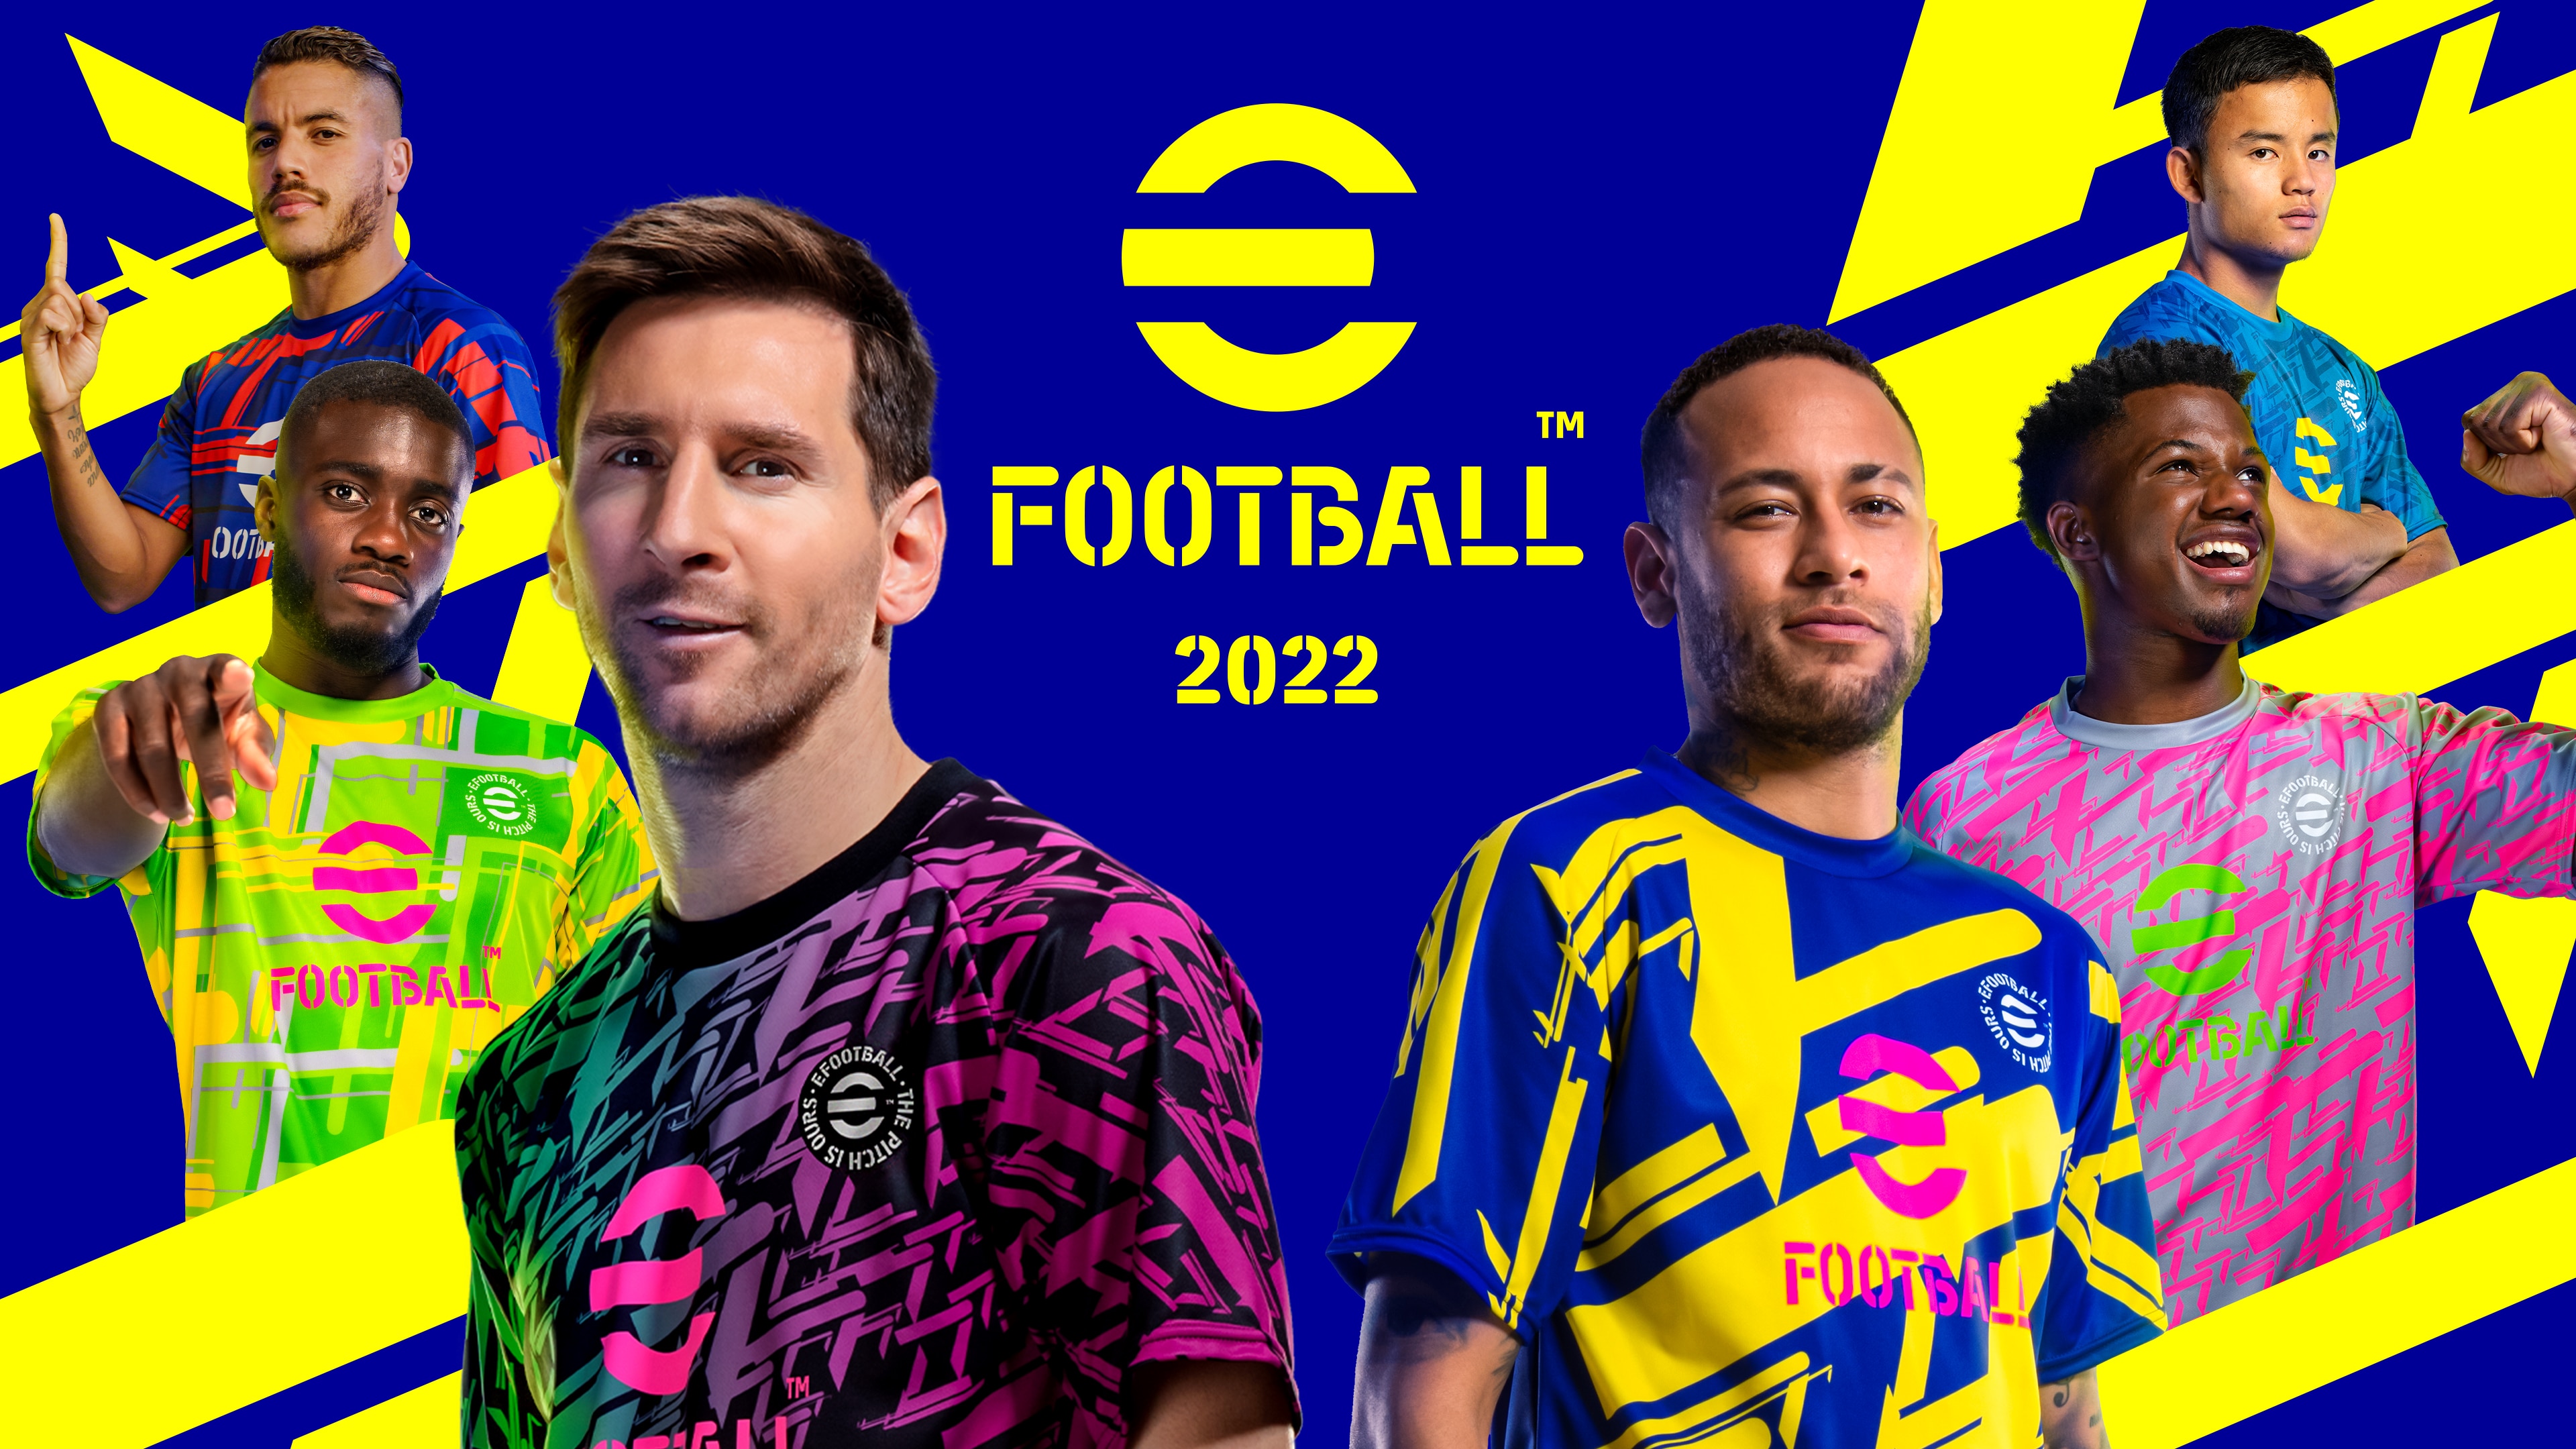 4K eFootball 2022 Wallpaper and Background Image